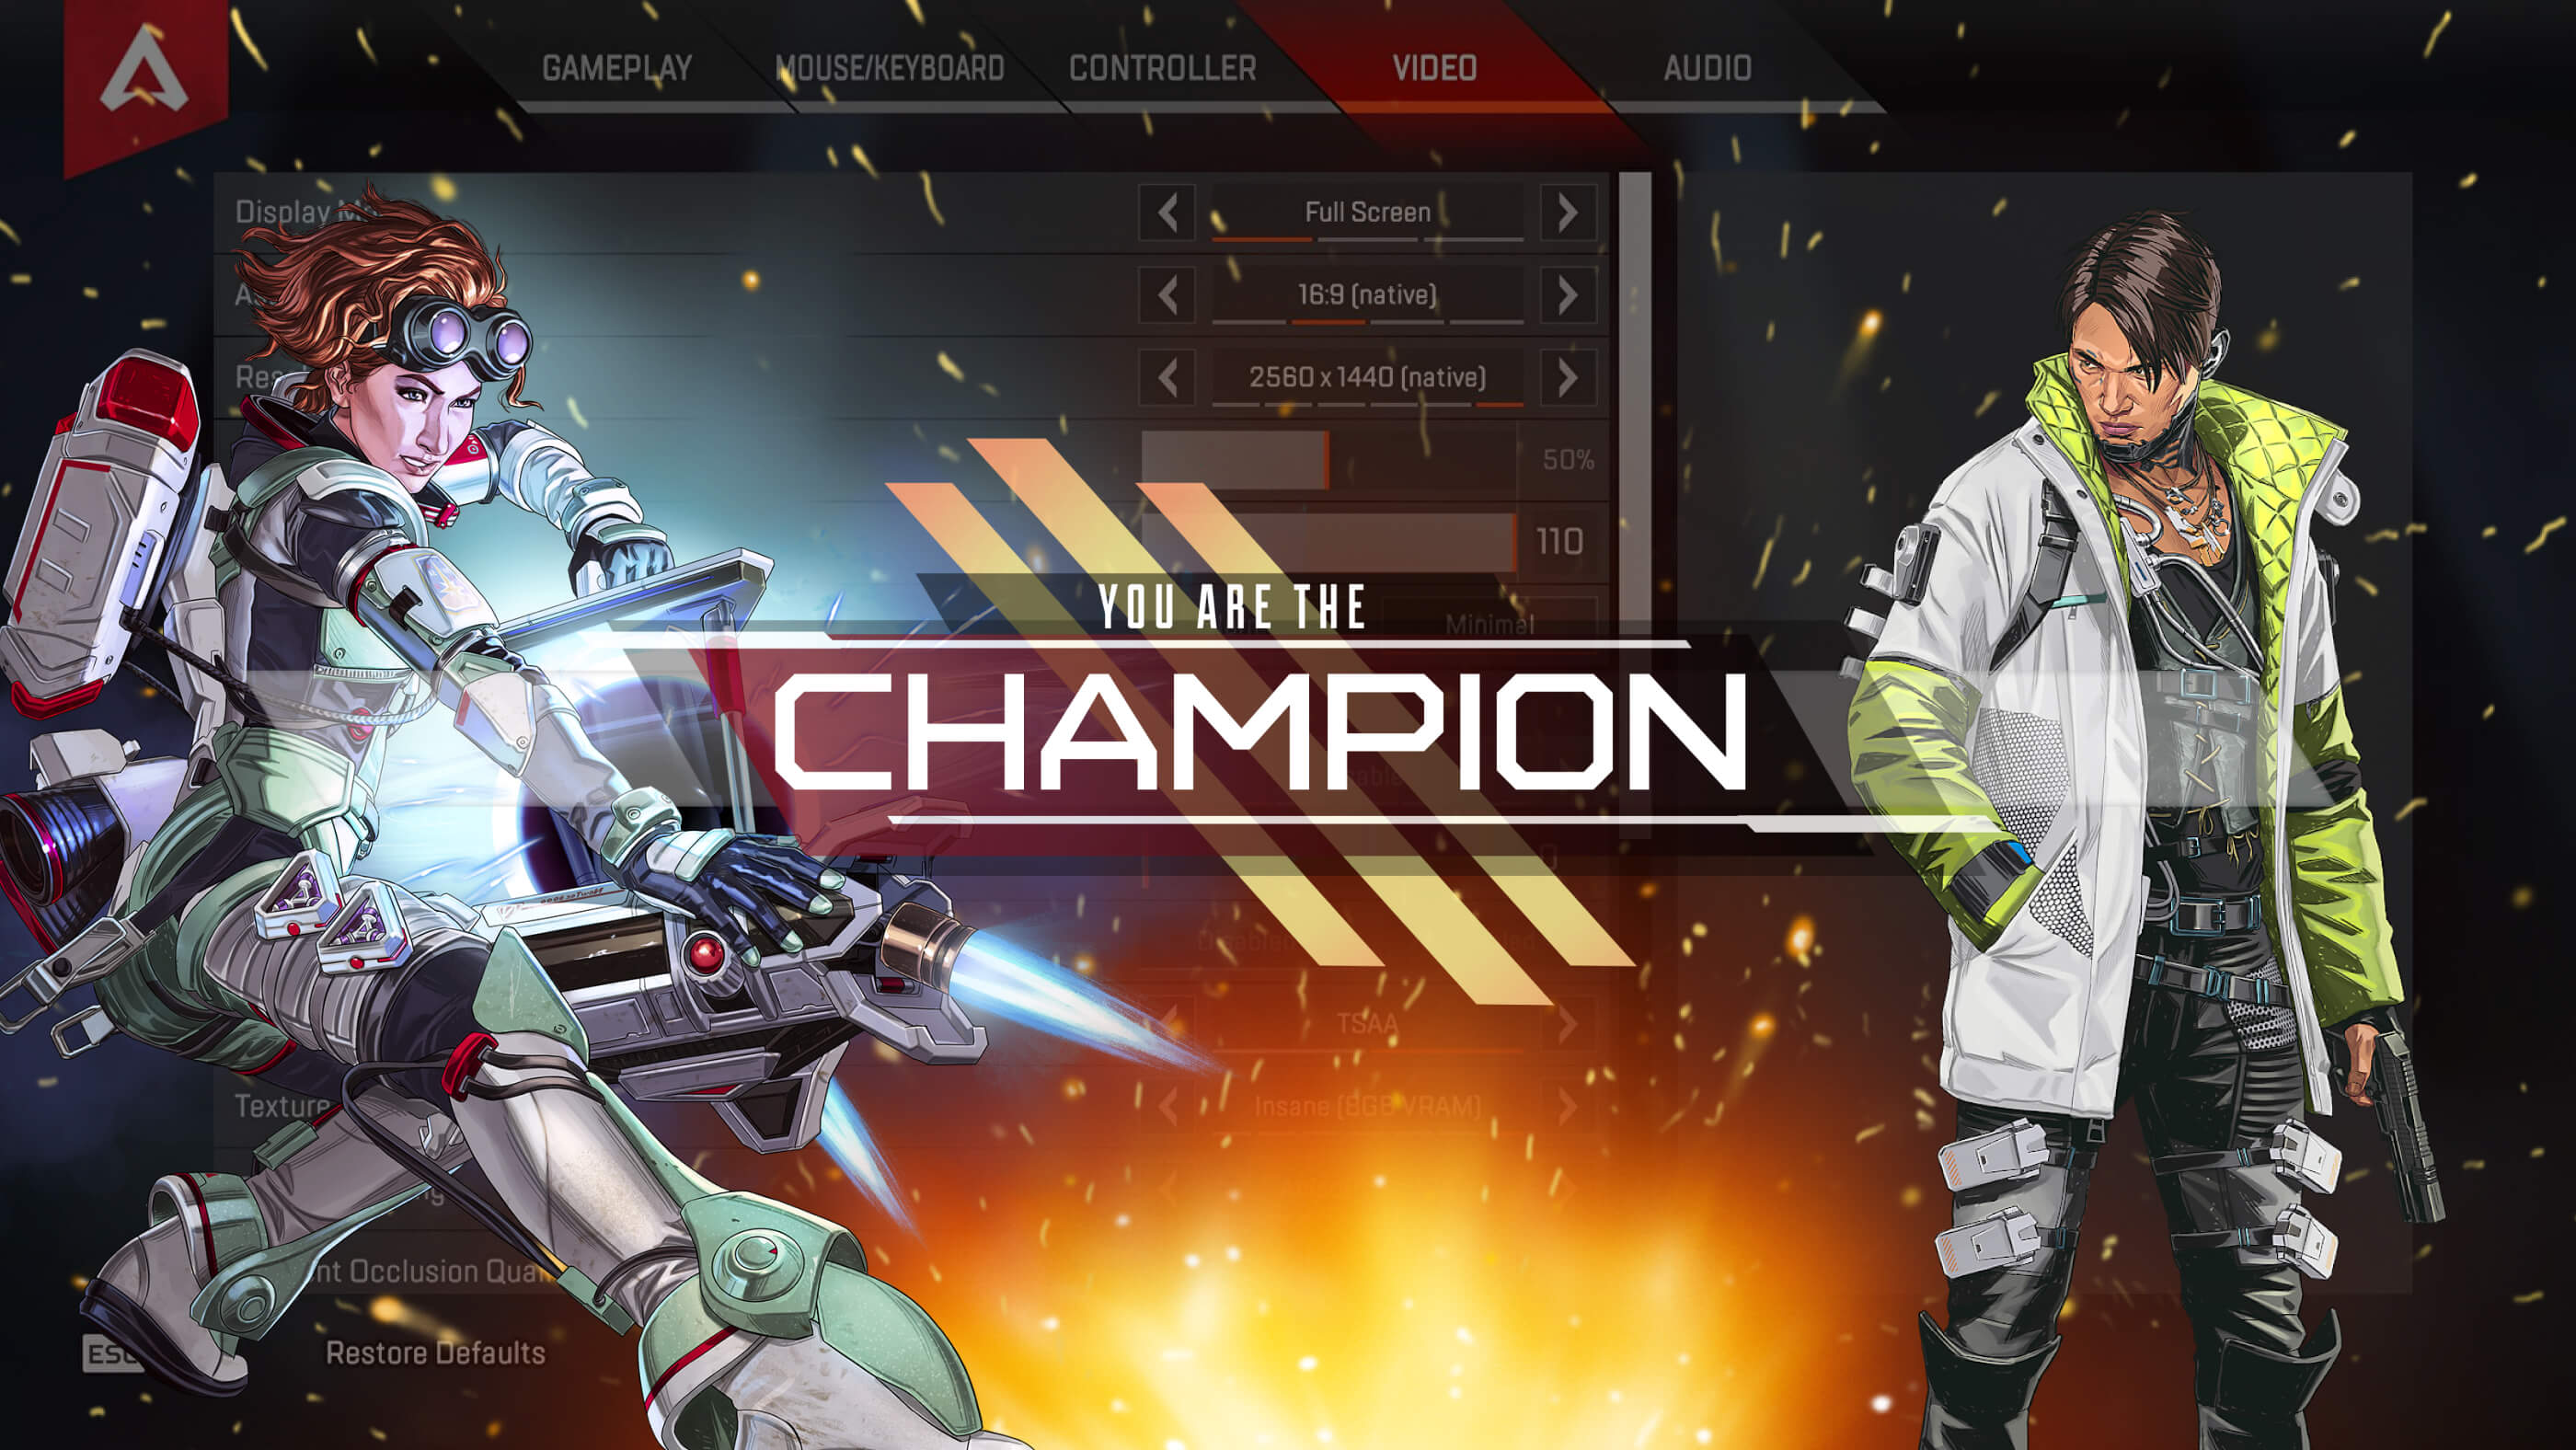 Apex Legends Mobile Shut Down Date and Time: When Are the Servers